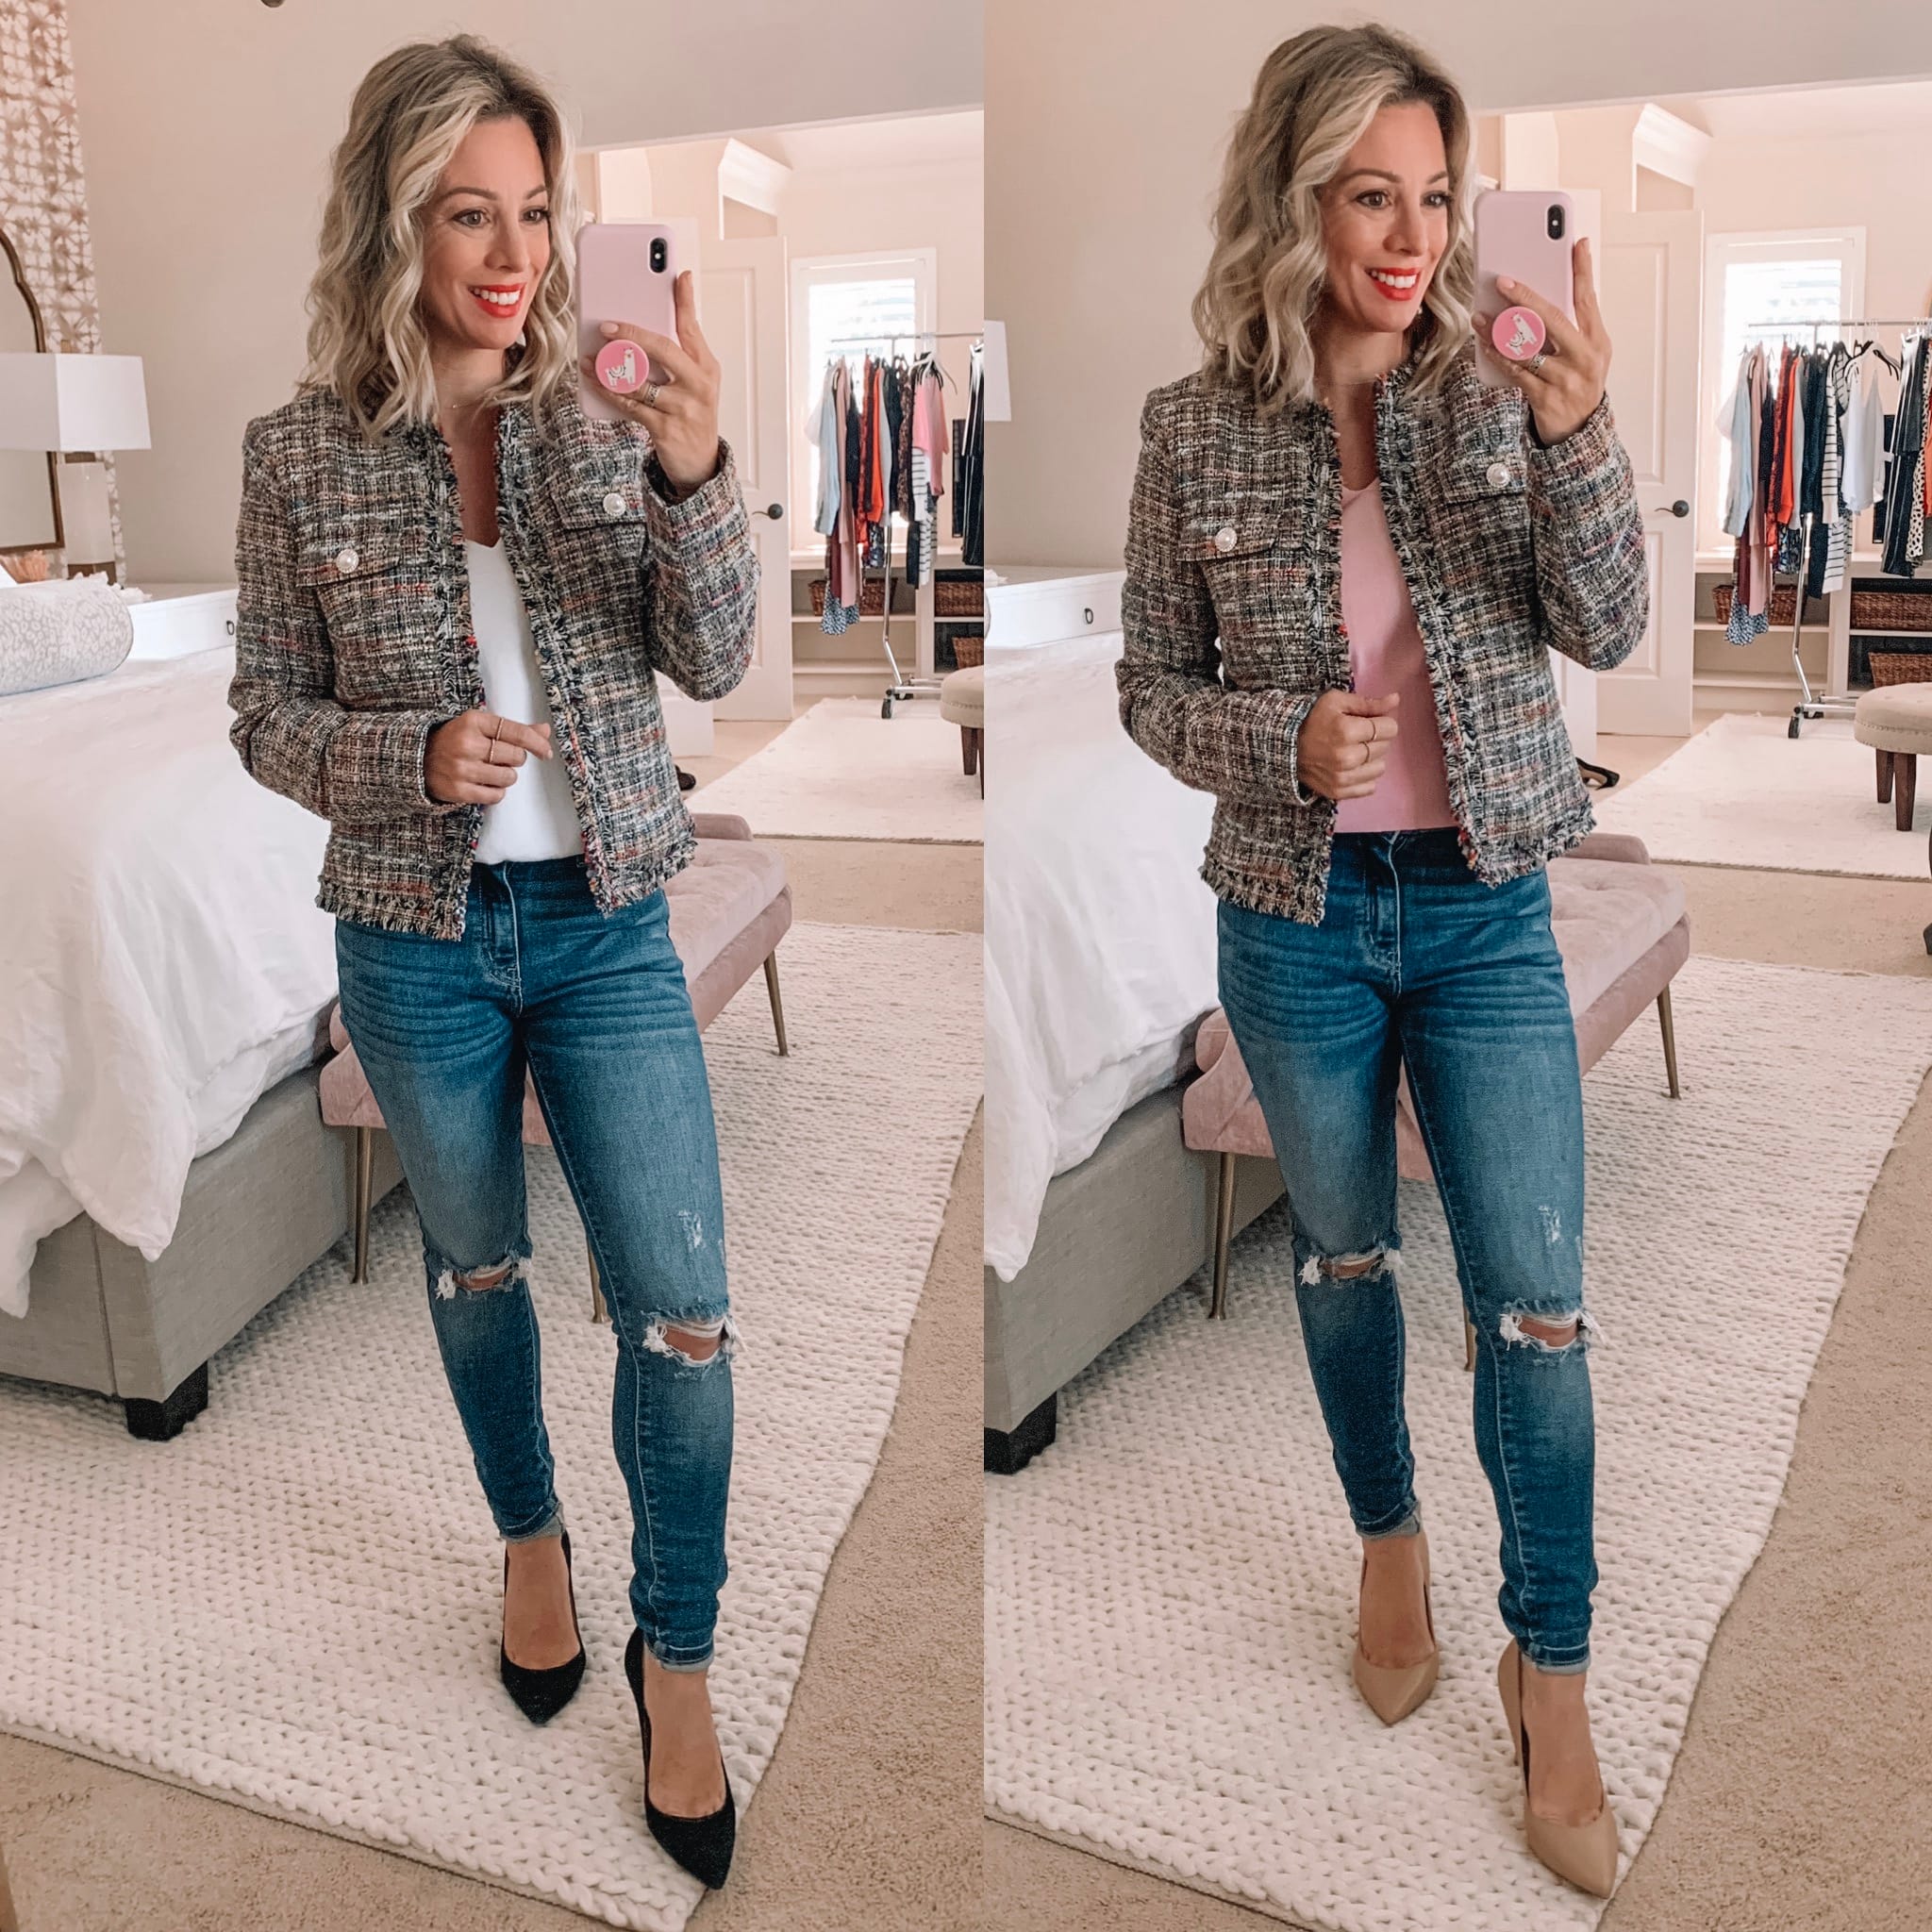 Dressing Room & Labor Day Sales - Honey We're Home